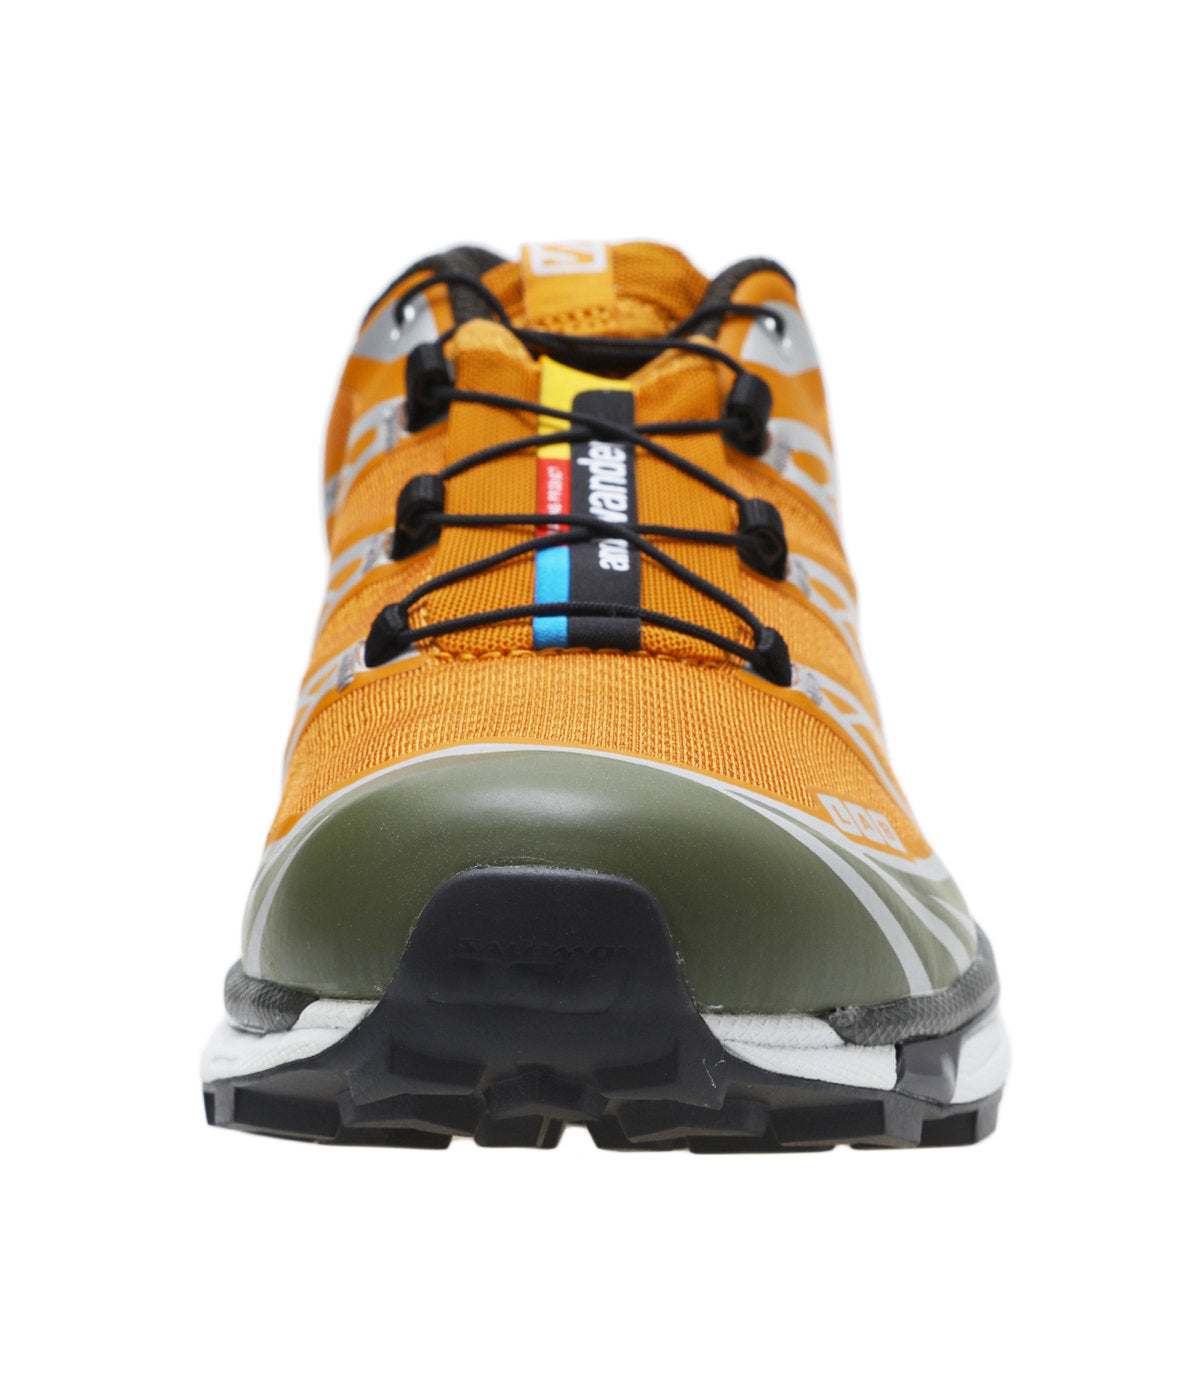 SALOMON XT-6 for and wander – unexpected store